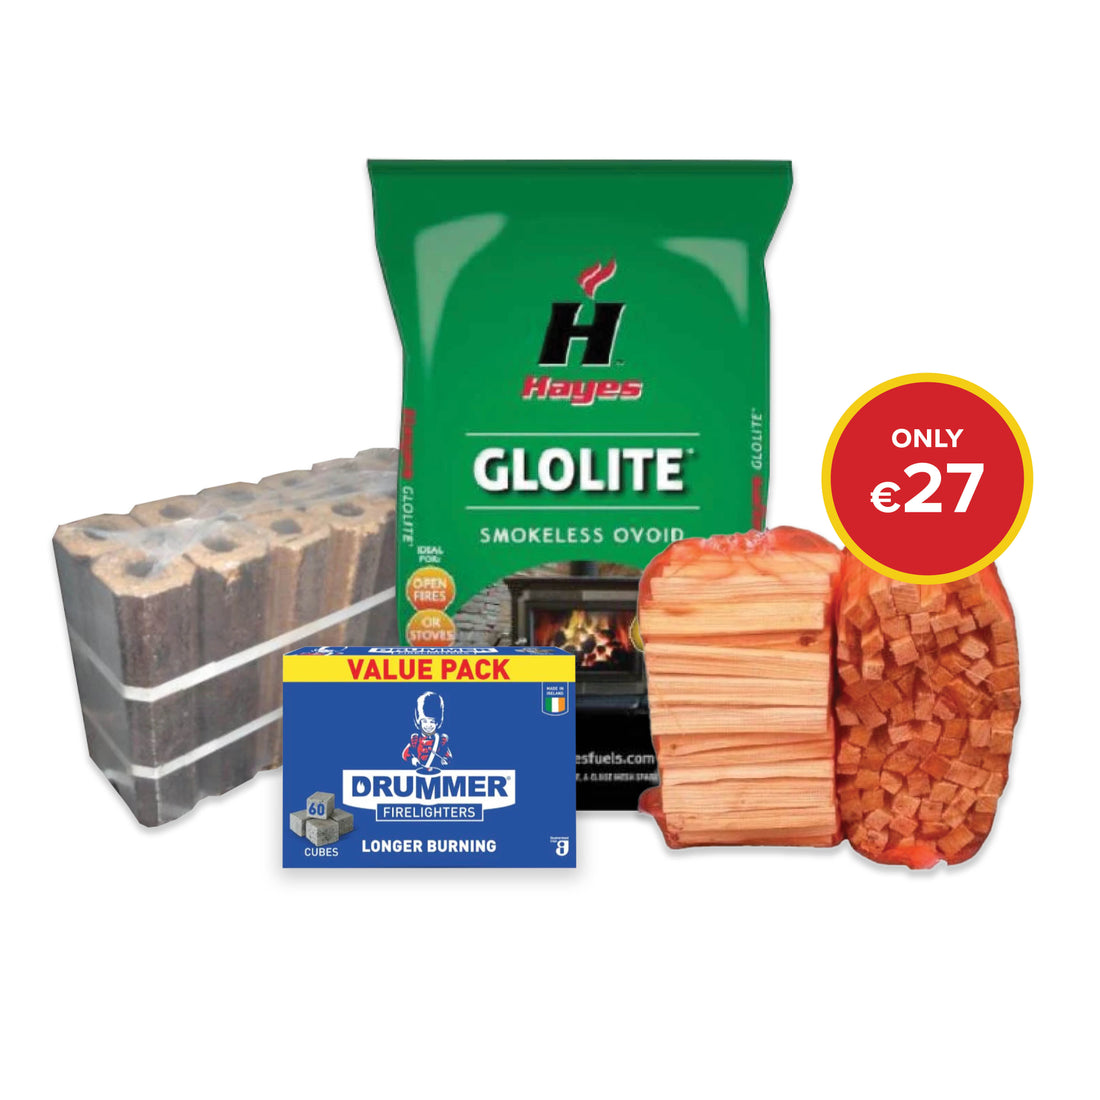 Buy 1 bag Glolite Coal 20kg, 1 box of Drummer Firelighters, 1 bags of Kindling and 1 pack of Hardwood Briquettes for €27